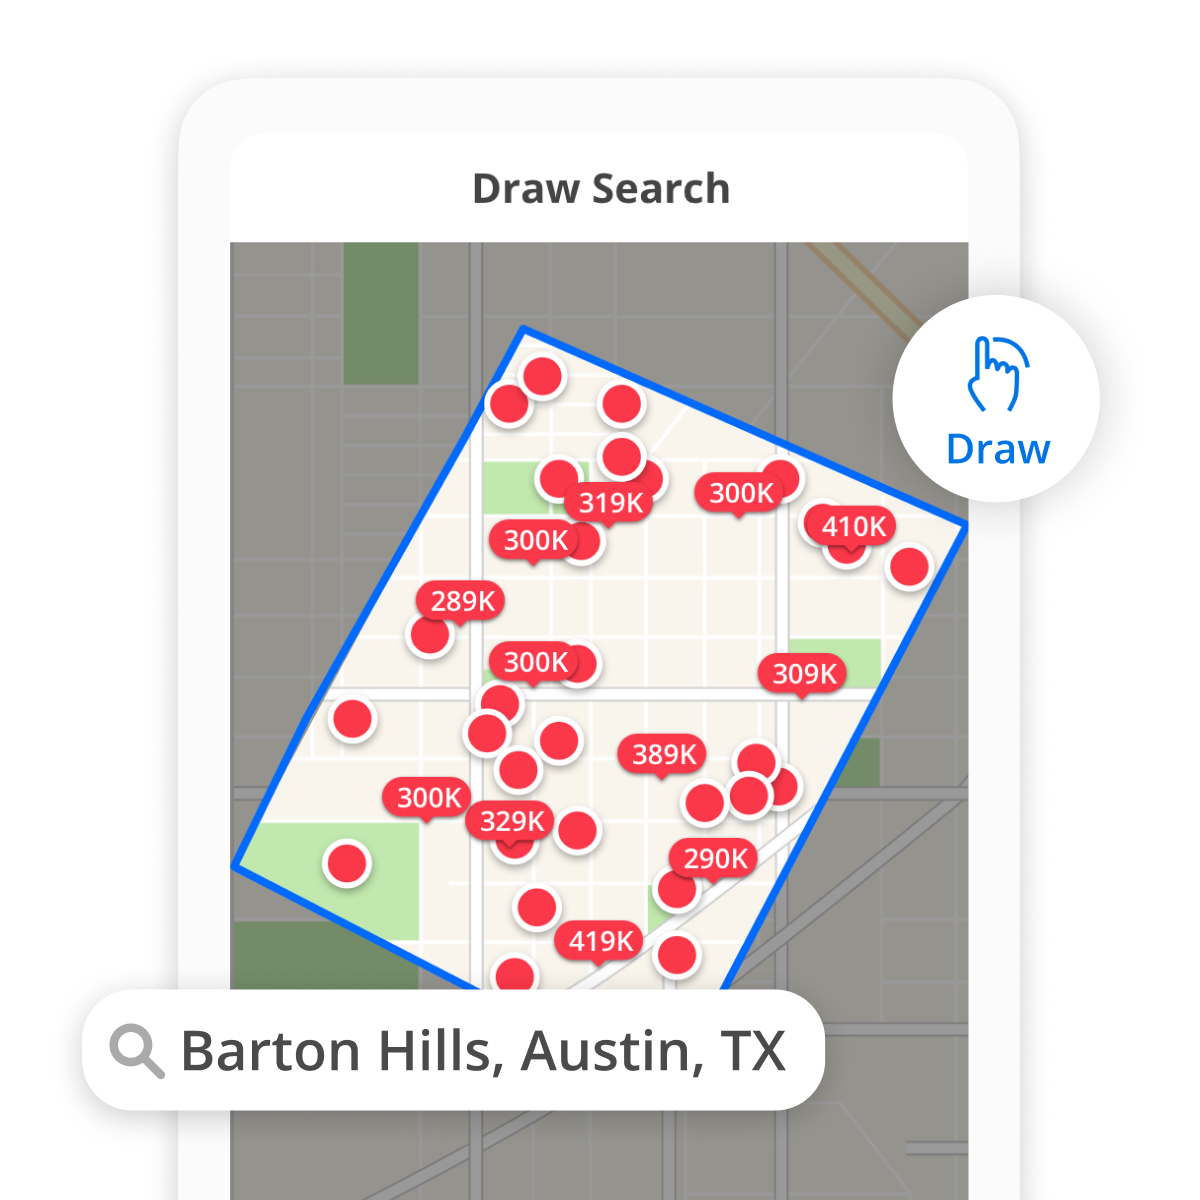 Draw search feature on Zillow home search tool.